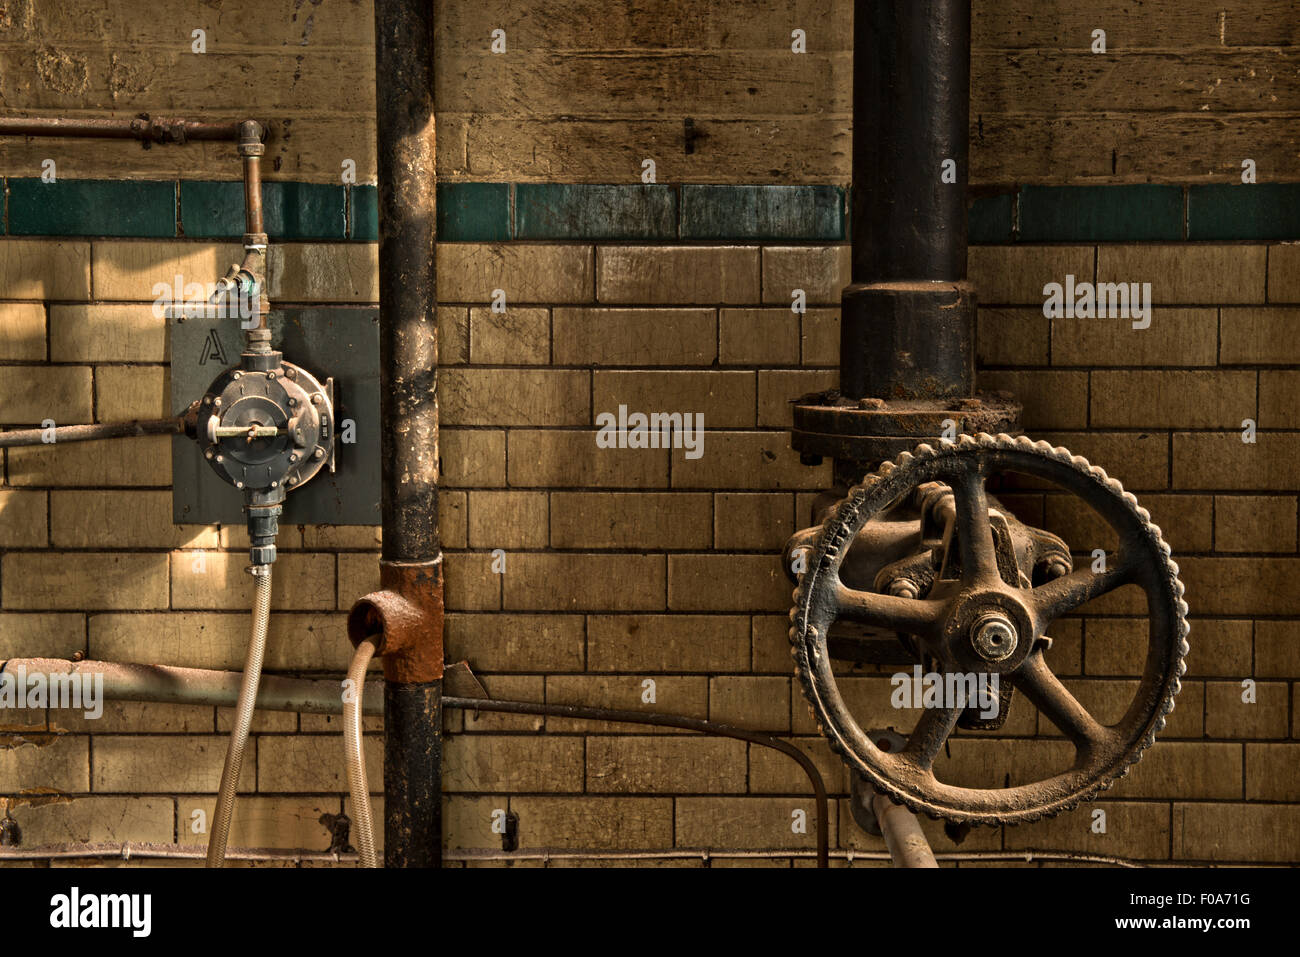 Valves and gages in Moseley Road Swimming Baths, Balsall Heath, Birmingham, UK Stock Photo